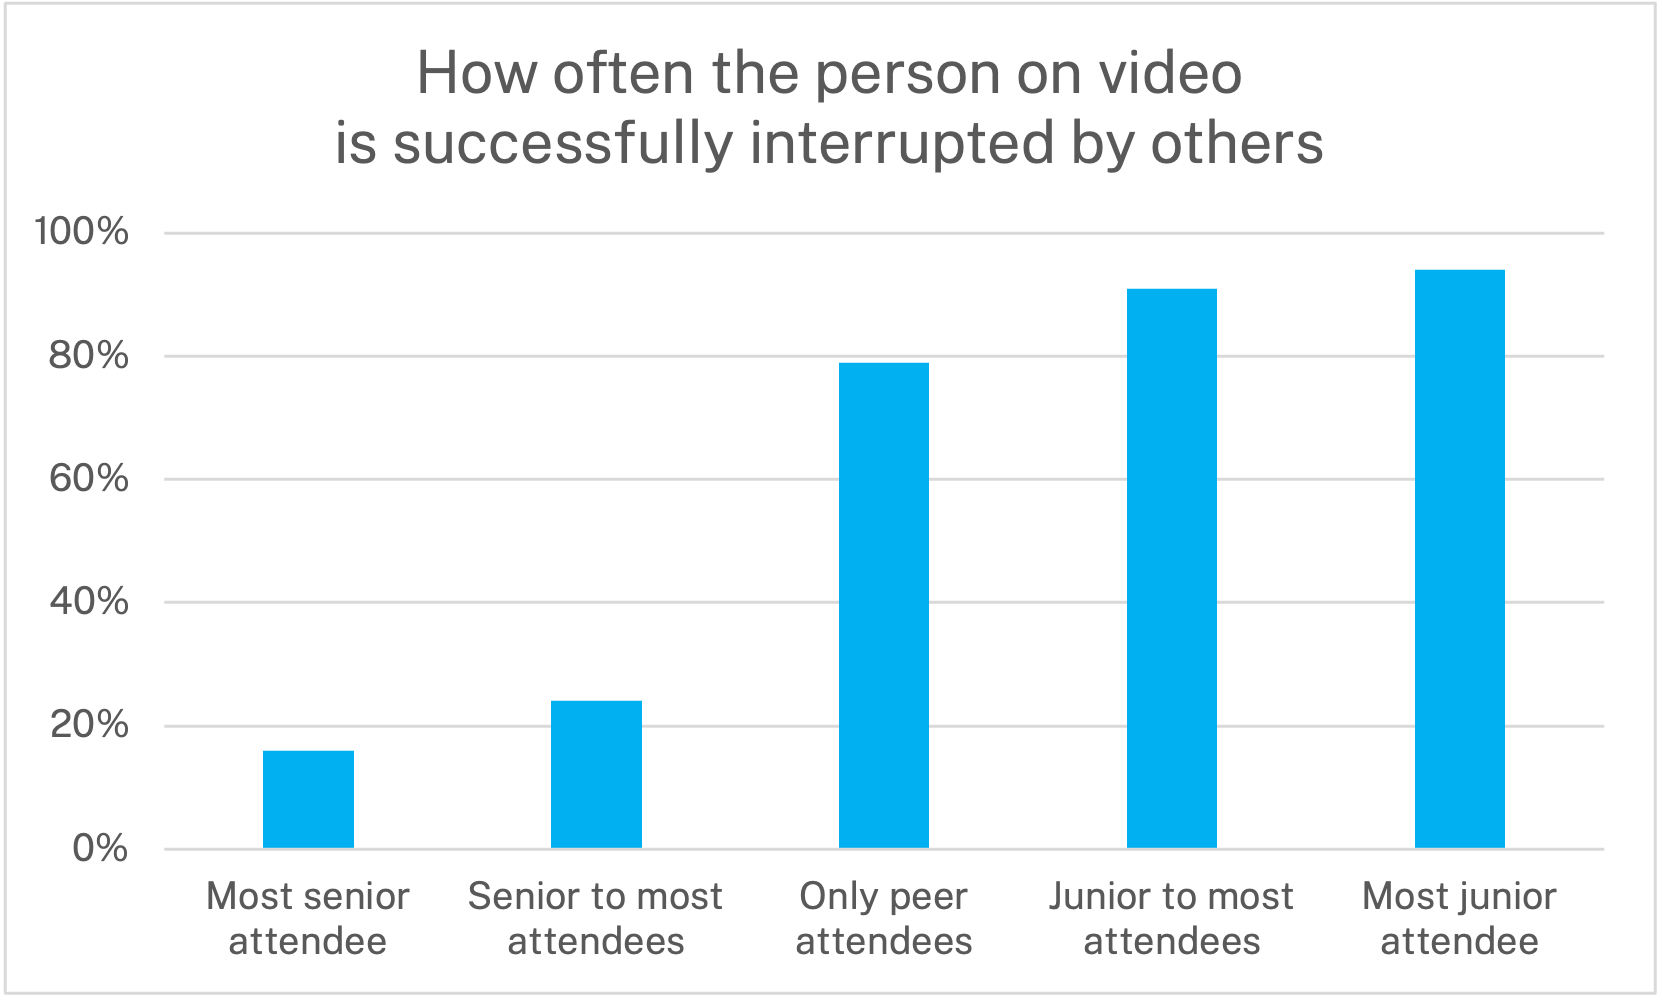 Chart showing how often the person of video is successfully interrupted by others: Most senior attendee	16% Senior to most attendees	24% Only peer attendees	79% Junior to most attendees	91% Most junior attendee	94%